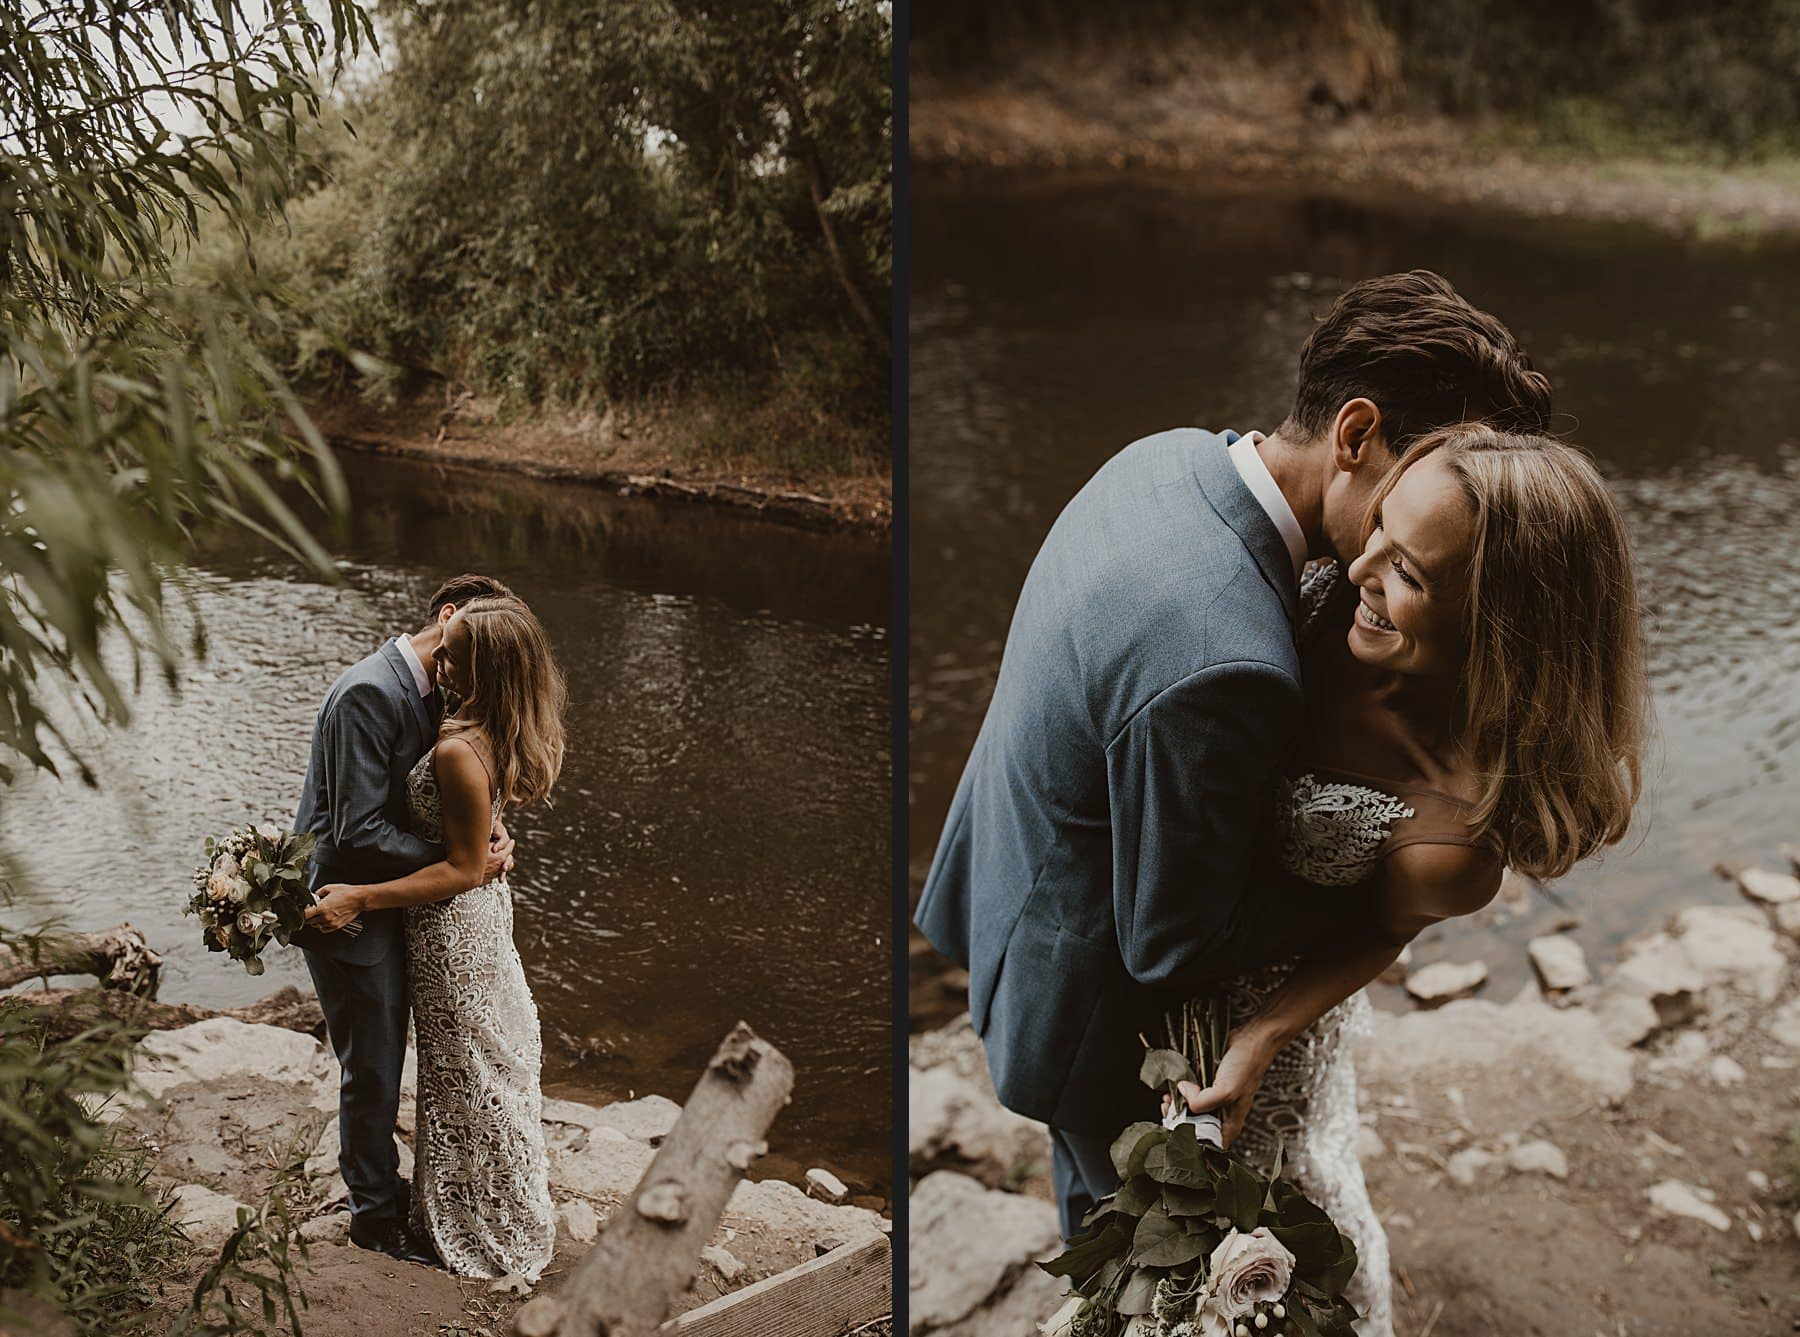 Couple laughing and cuddling by a river